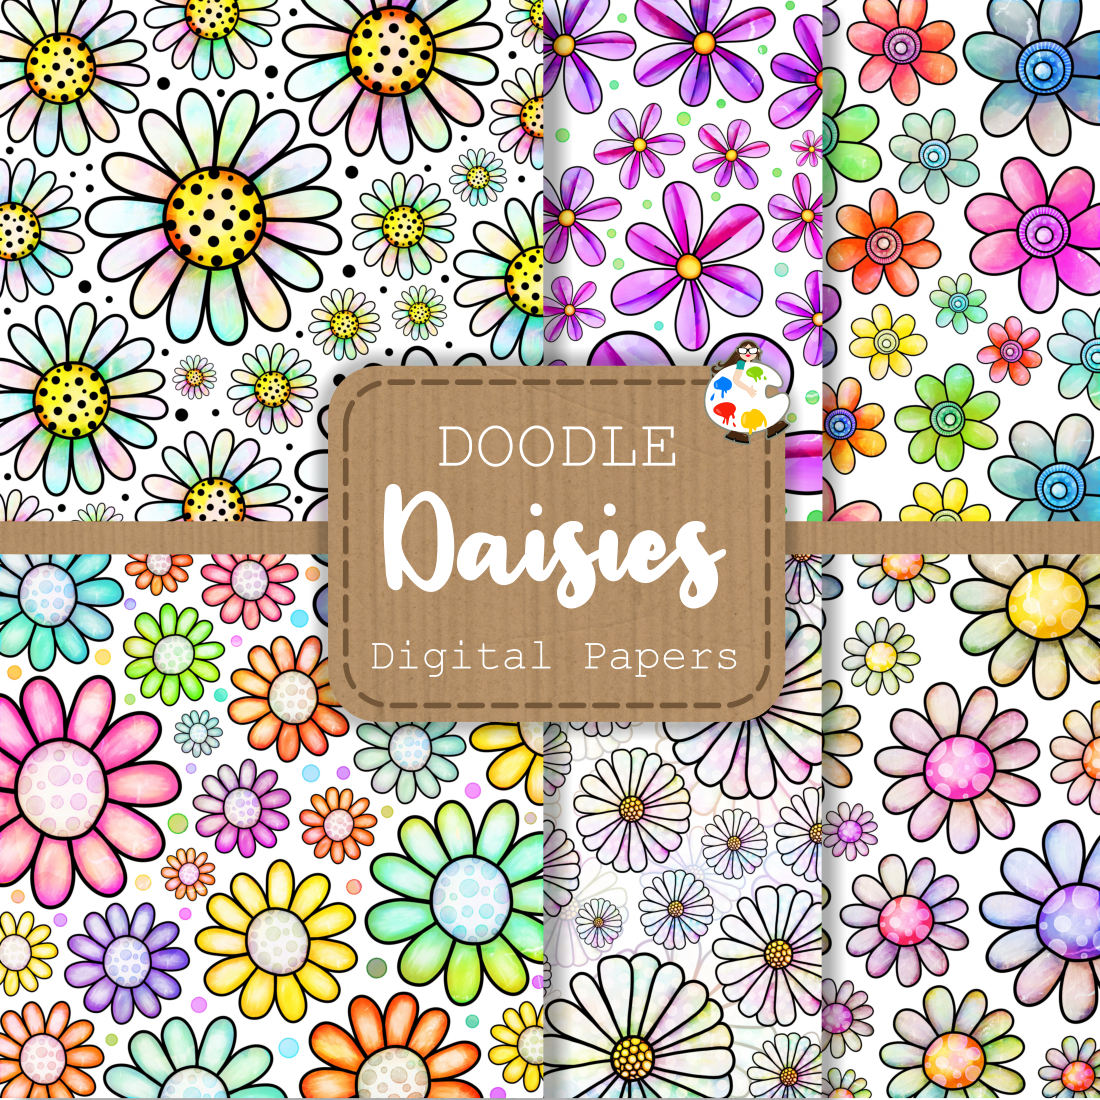 Watercolor Ink Doodle Daisy Flower Pattern Papers cover image.